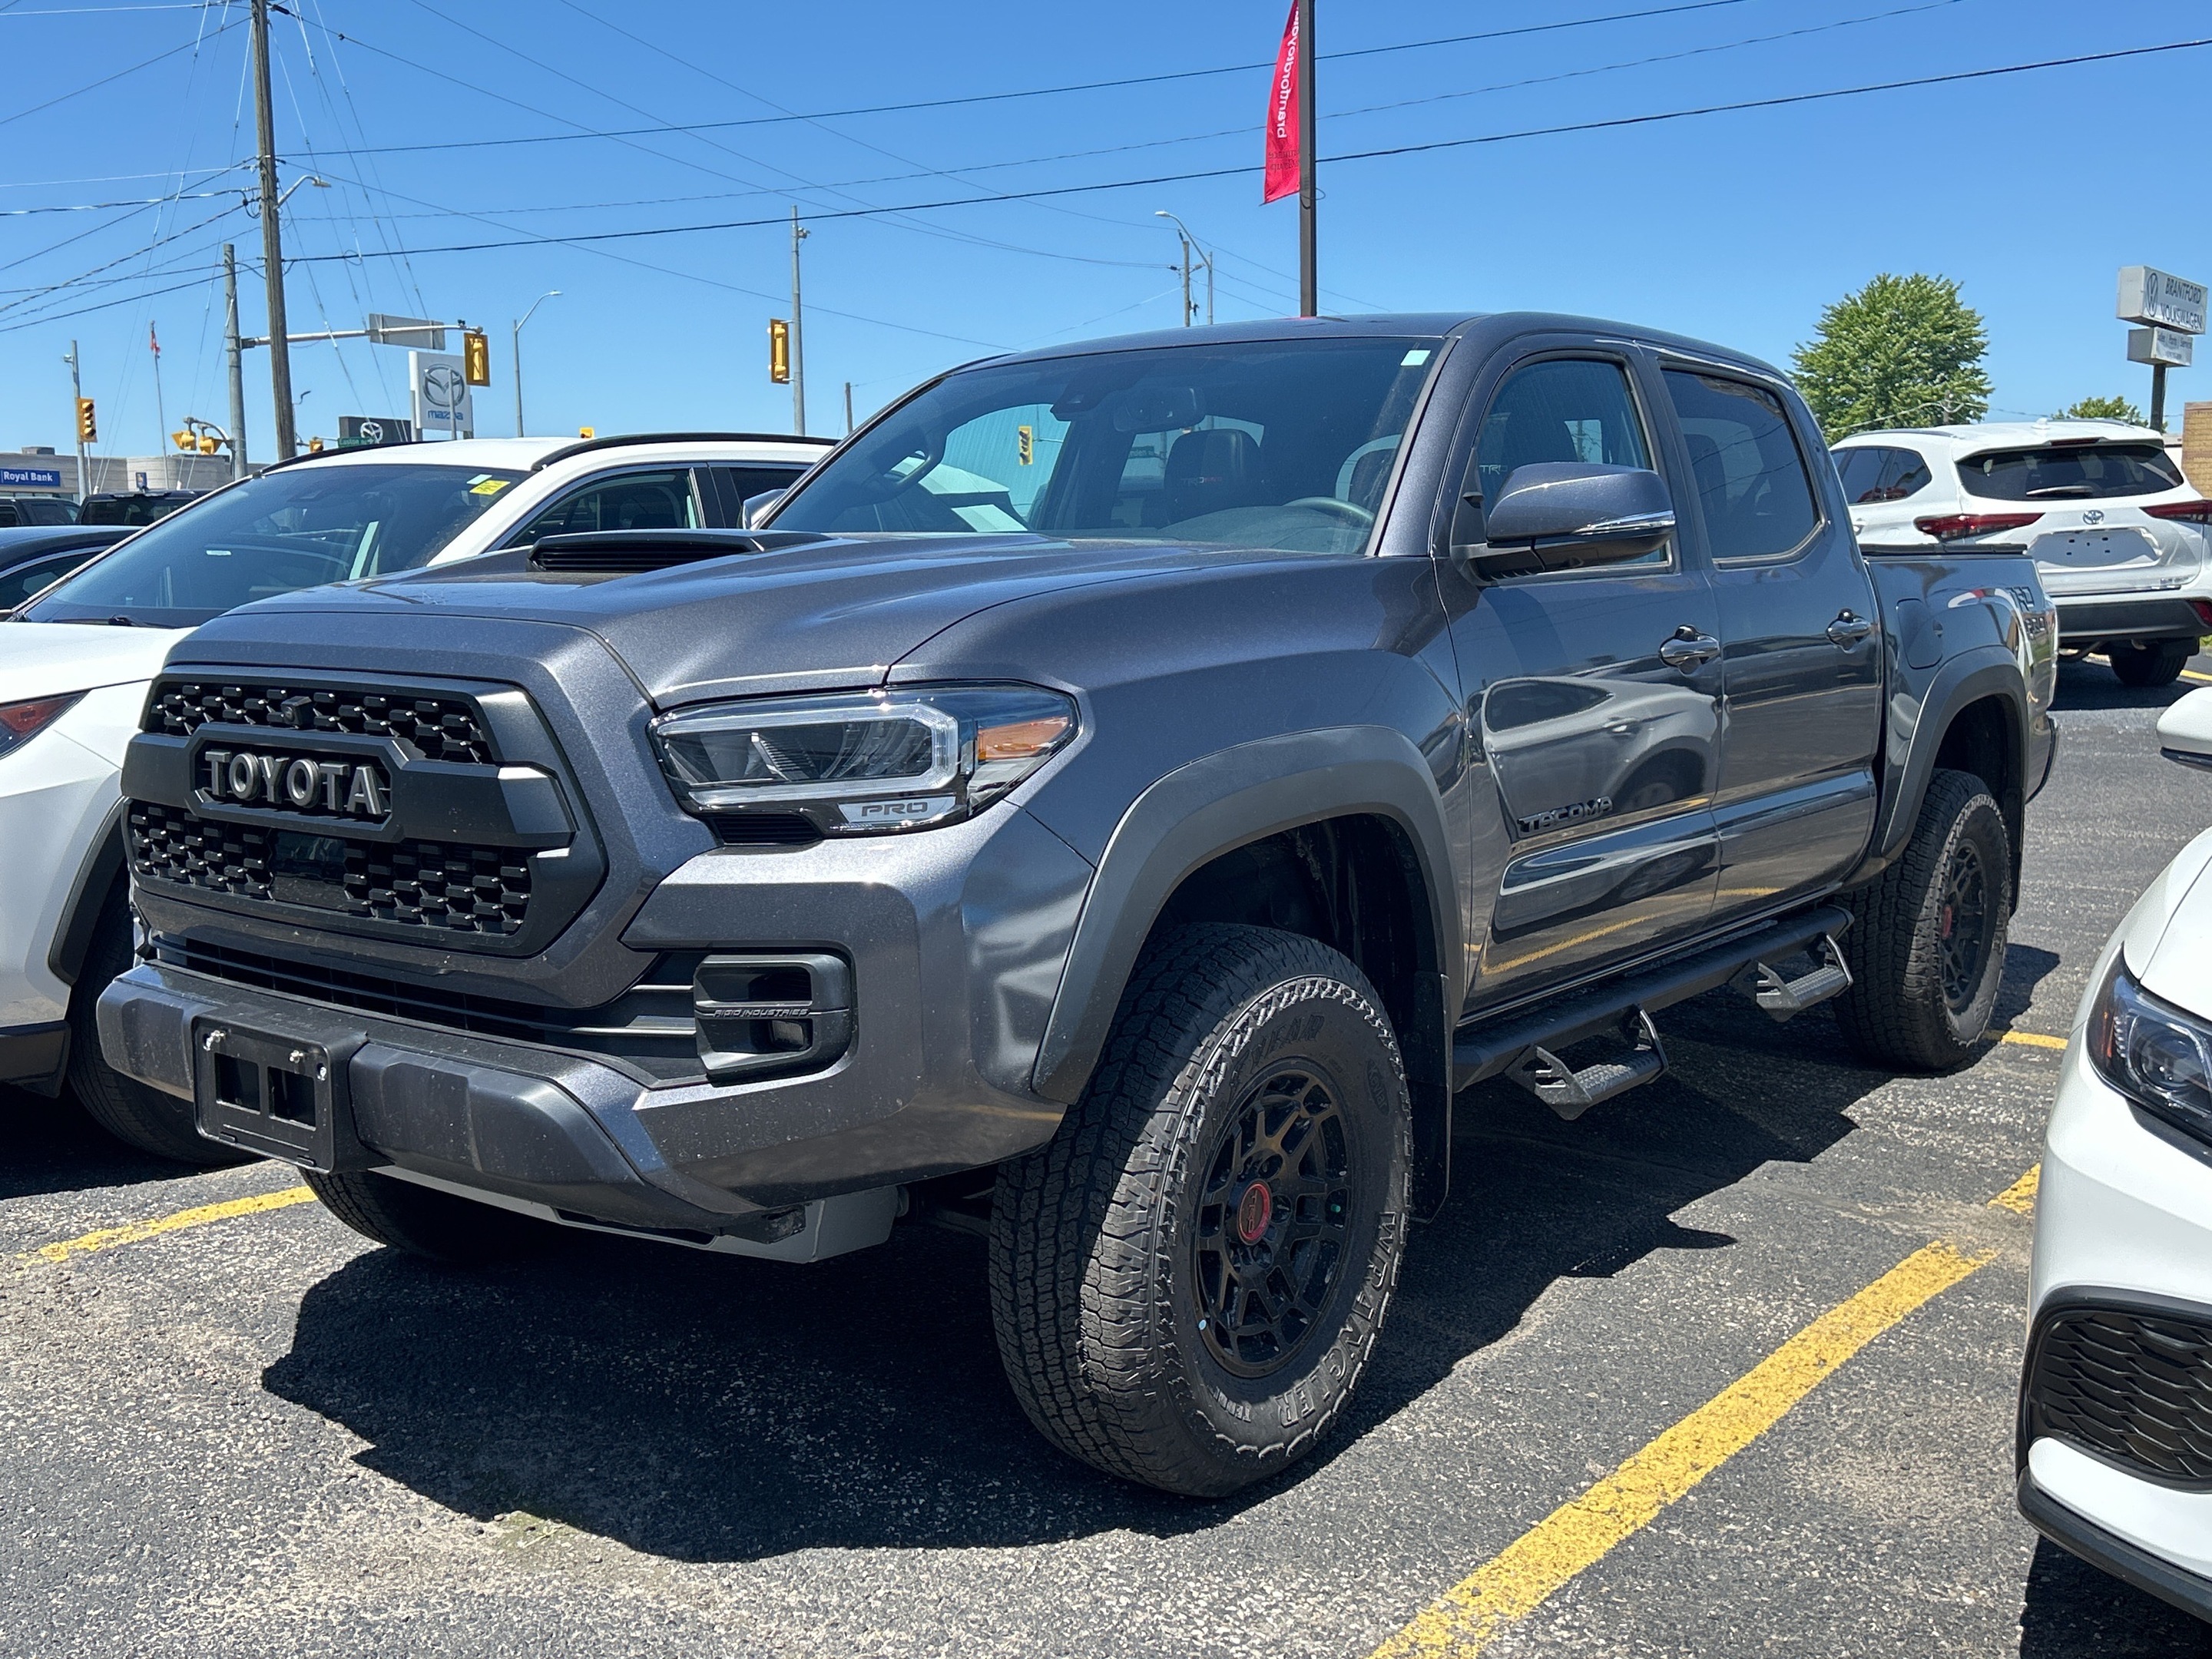 2023 Toyota Tacoma SOLD - PENDING DELIVERY